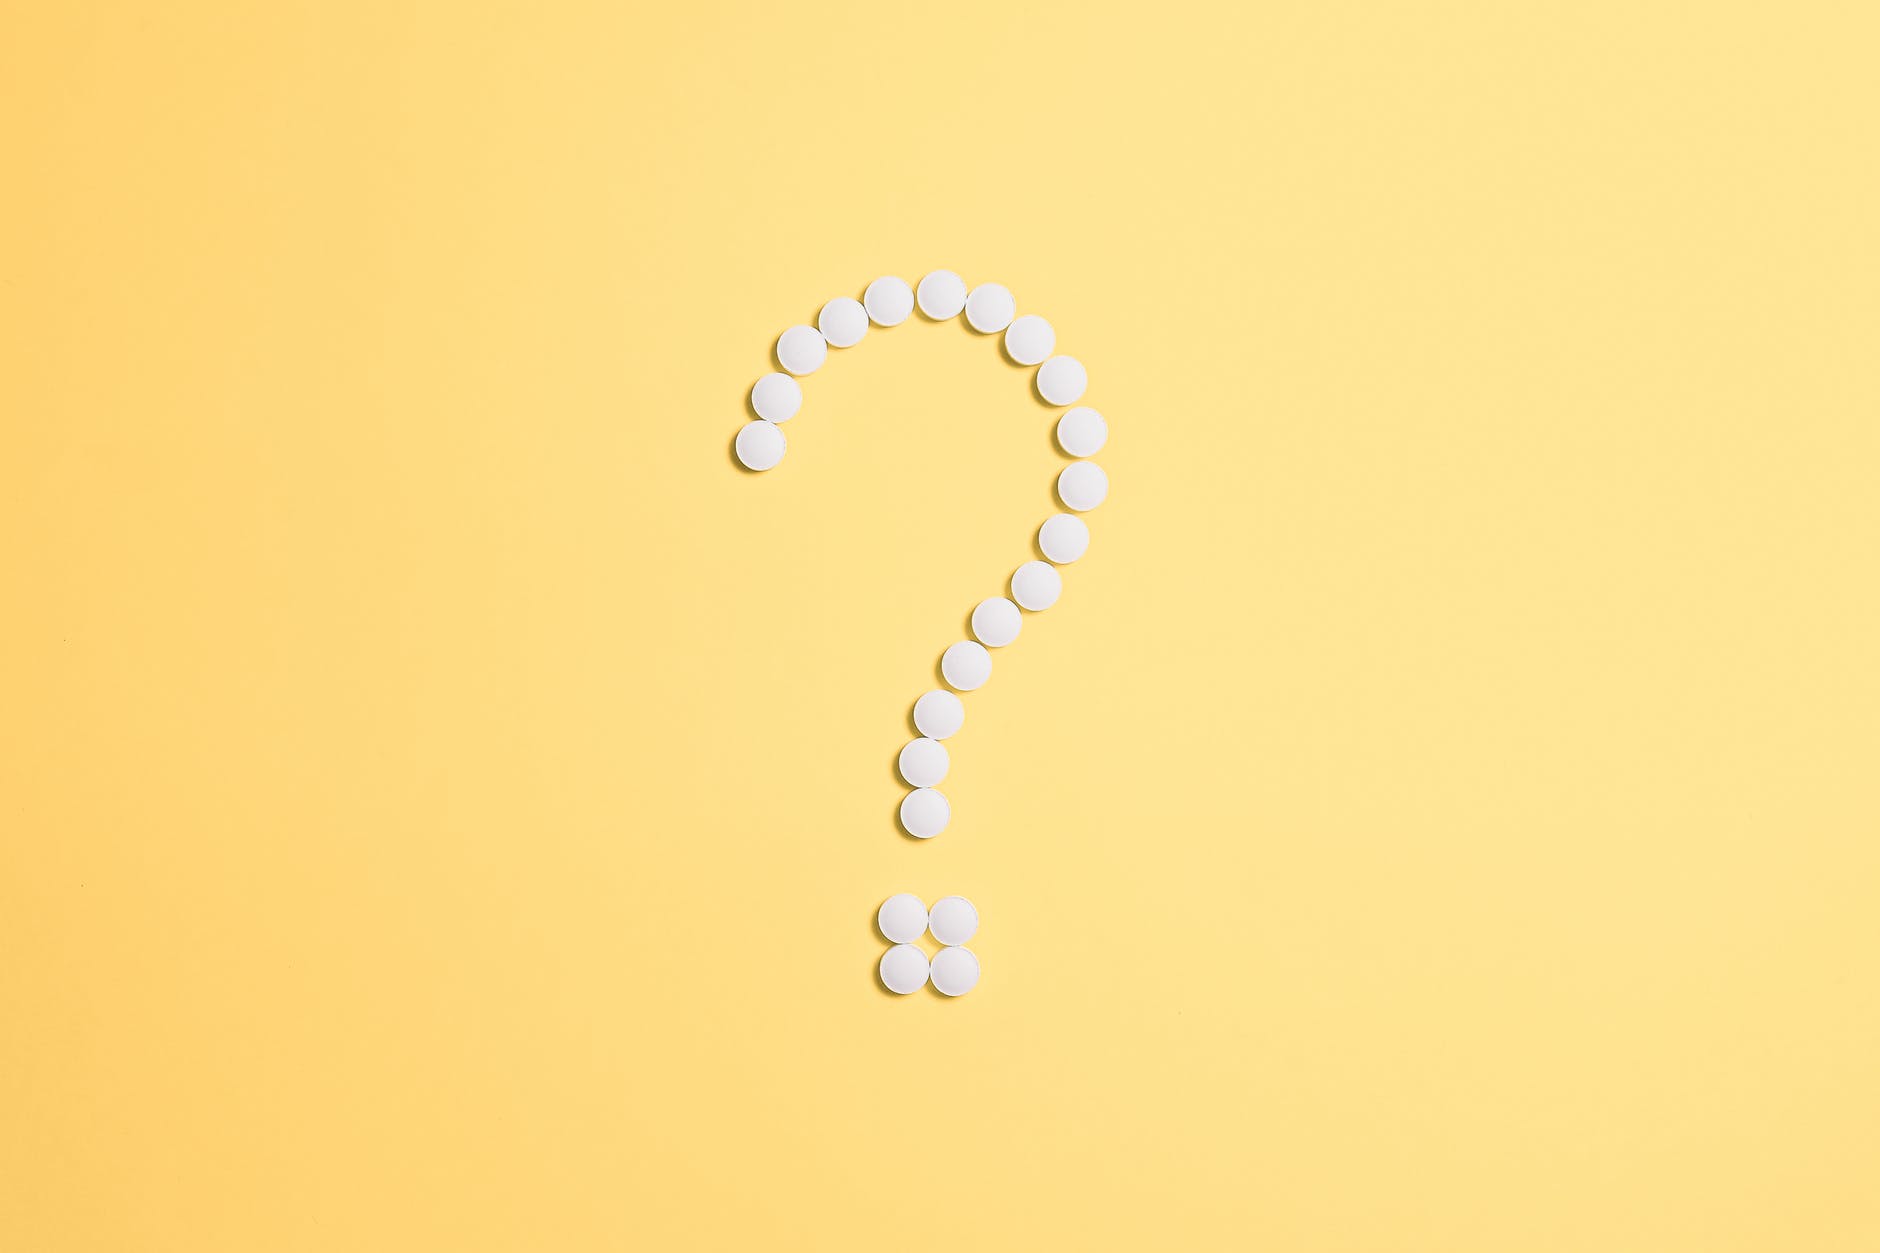 10 Facts to Consider Before Using an Online Pharmacy